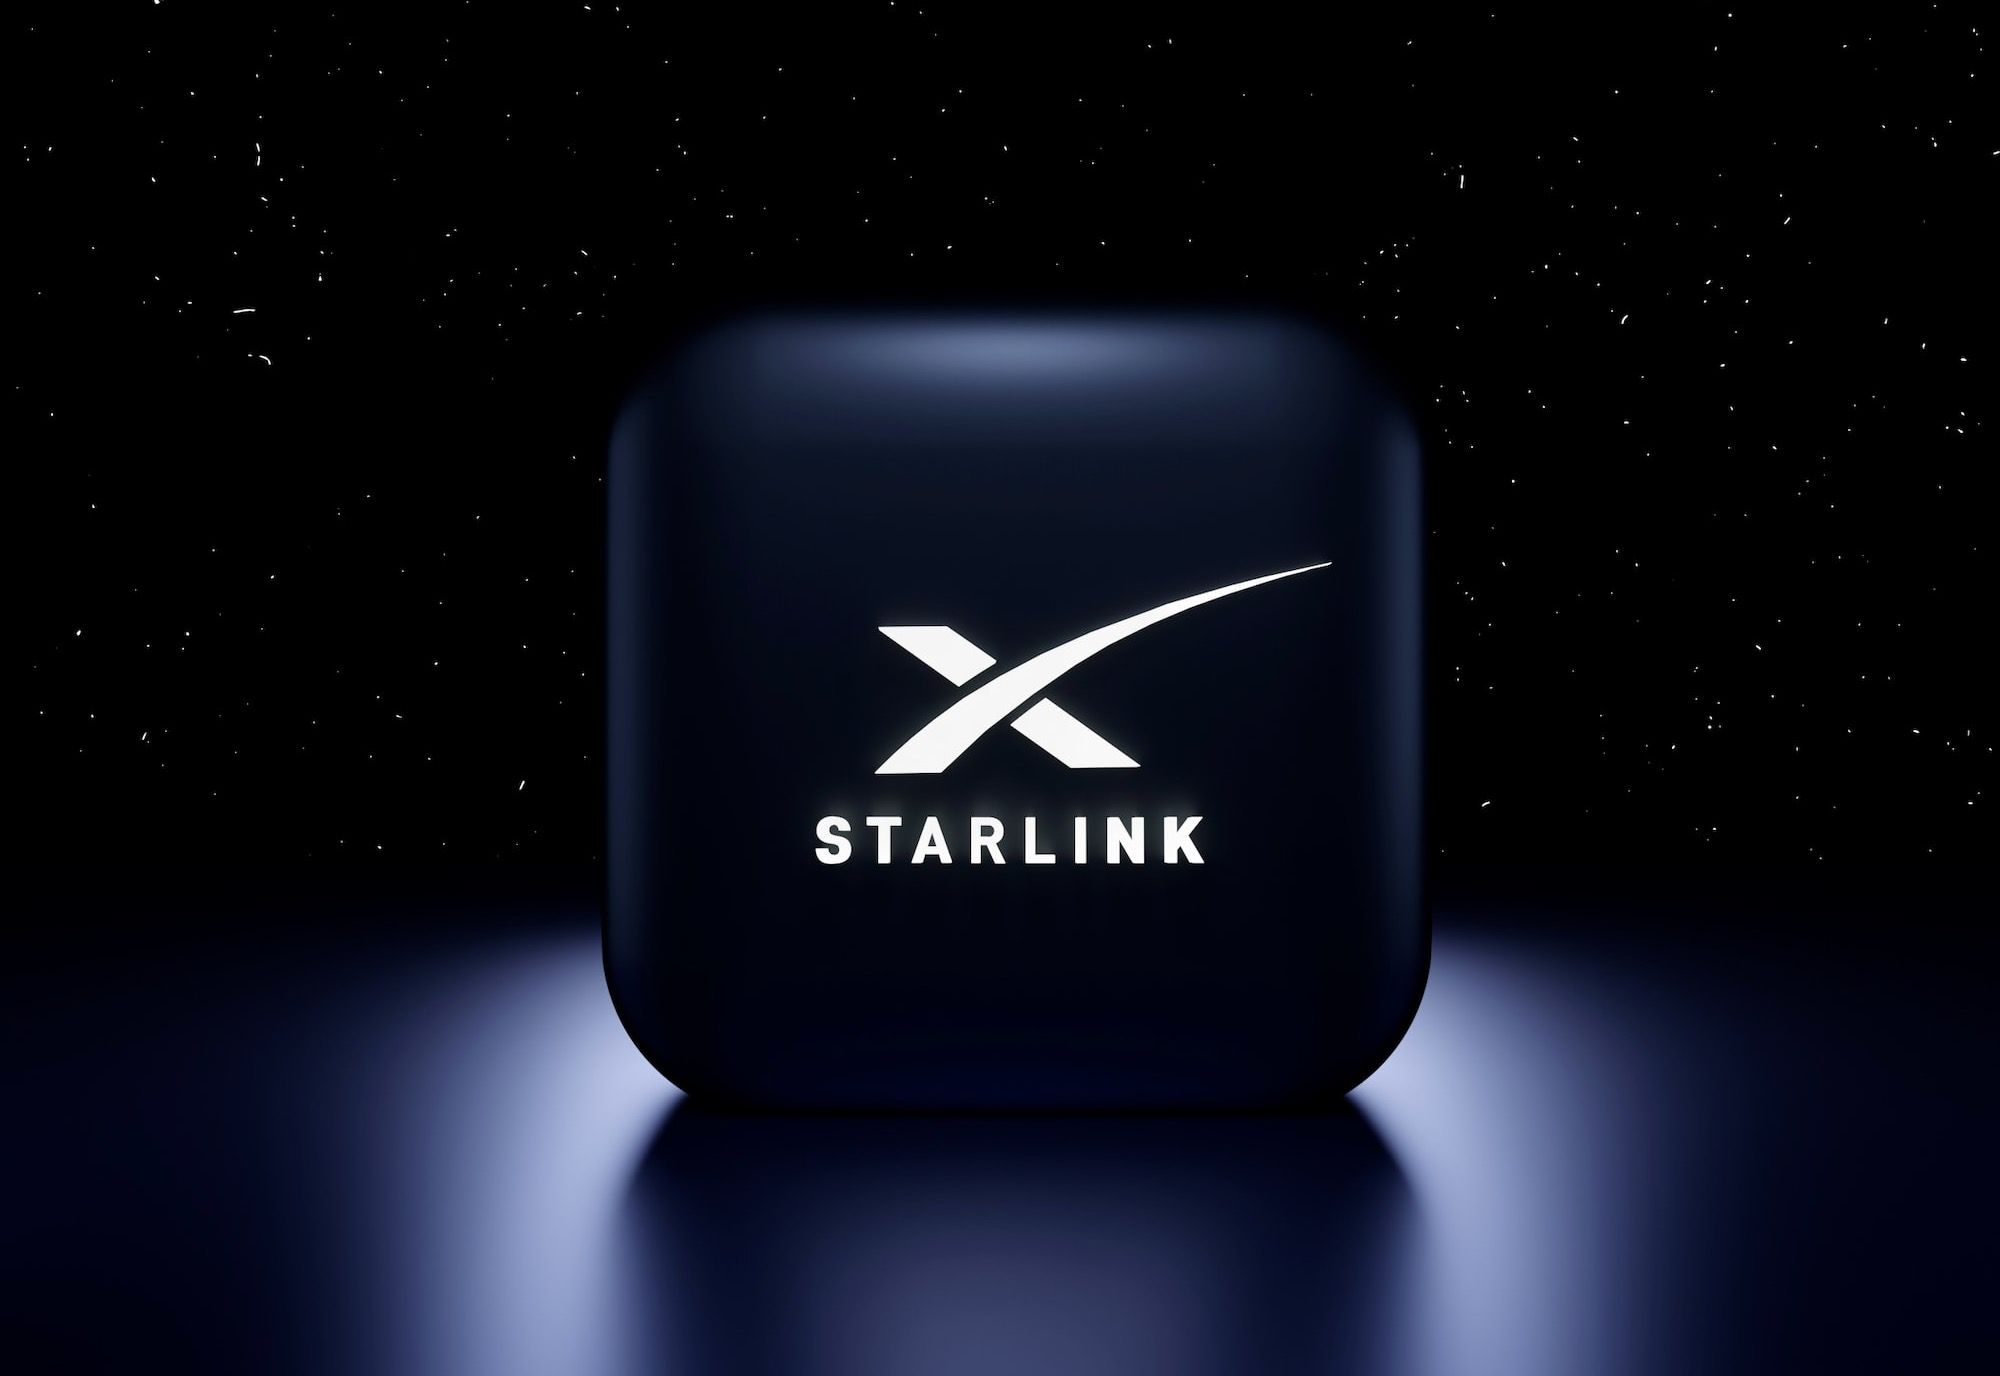 A look at Starlink's satellite internet service in Africa